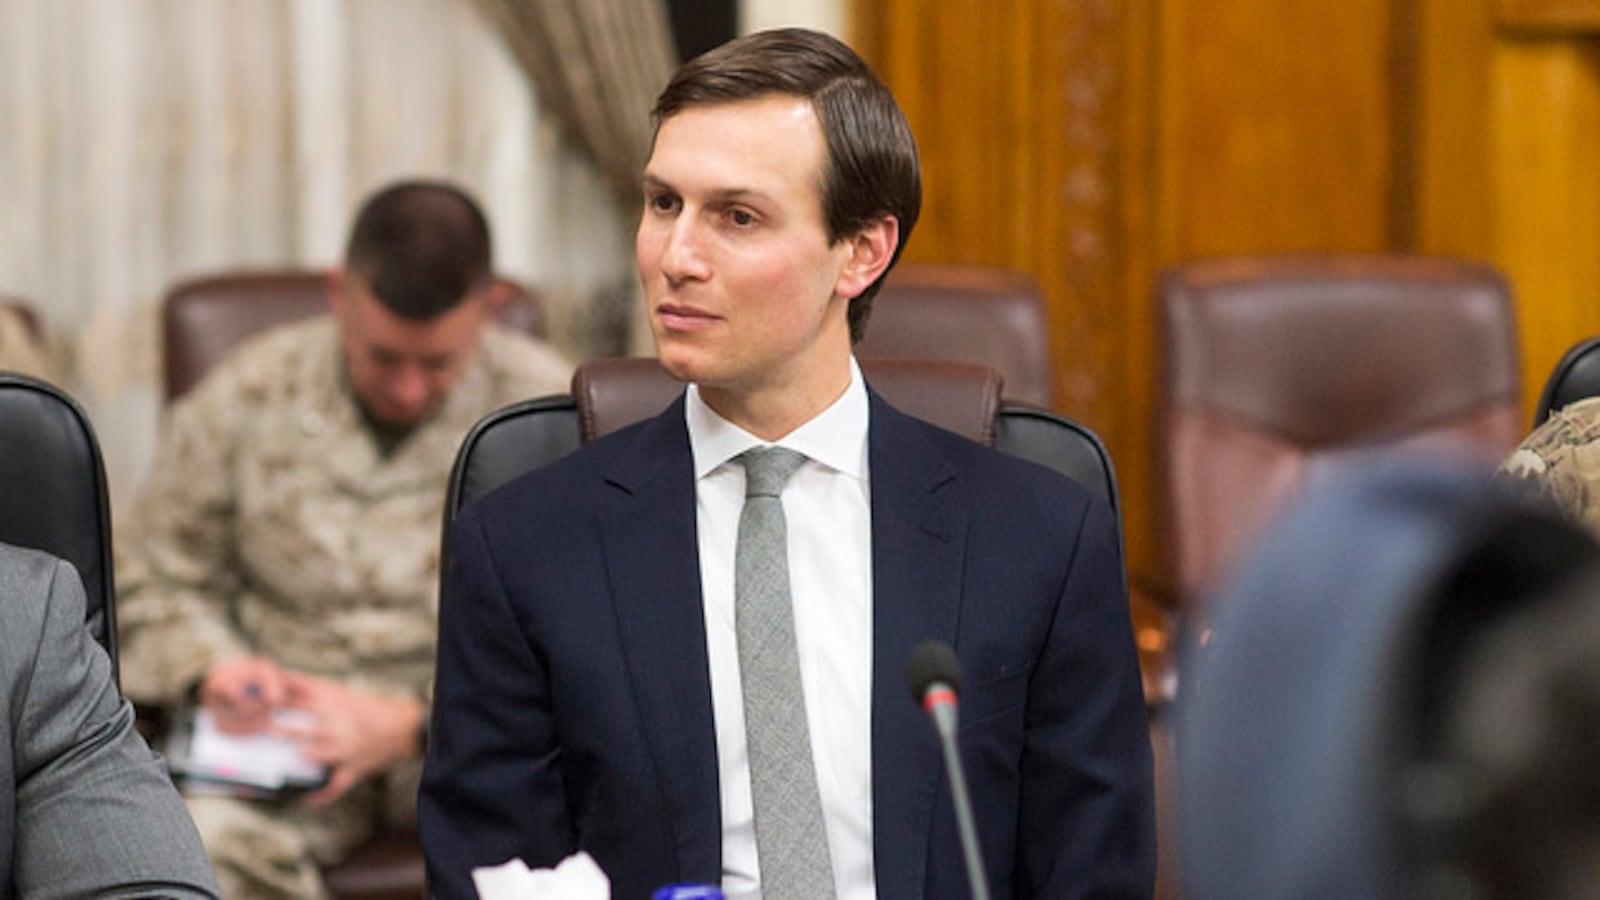 Jared Kushner during an April 2017 meeting of the Joint Chiefs of Staff.